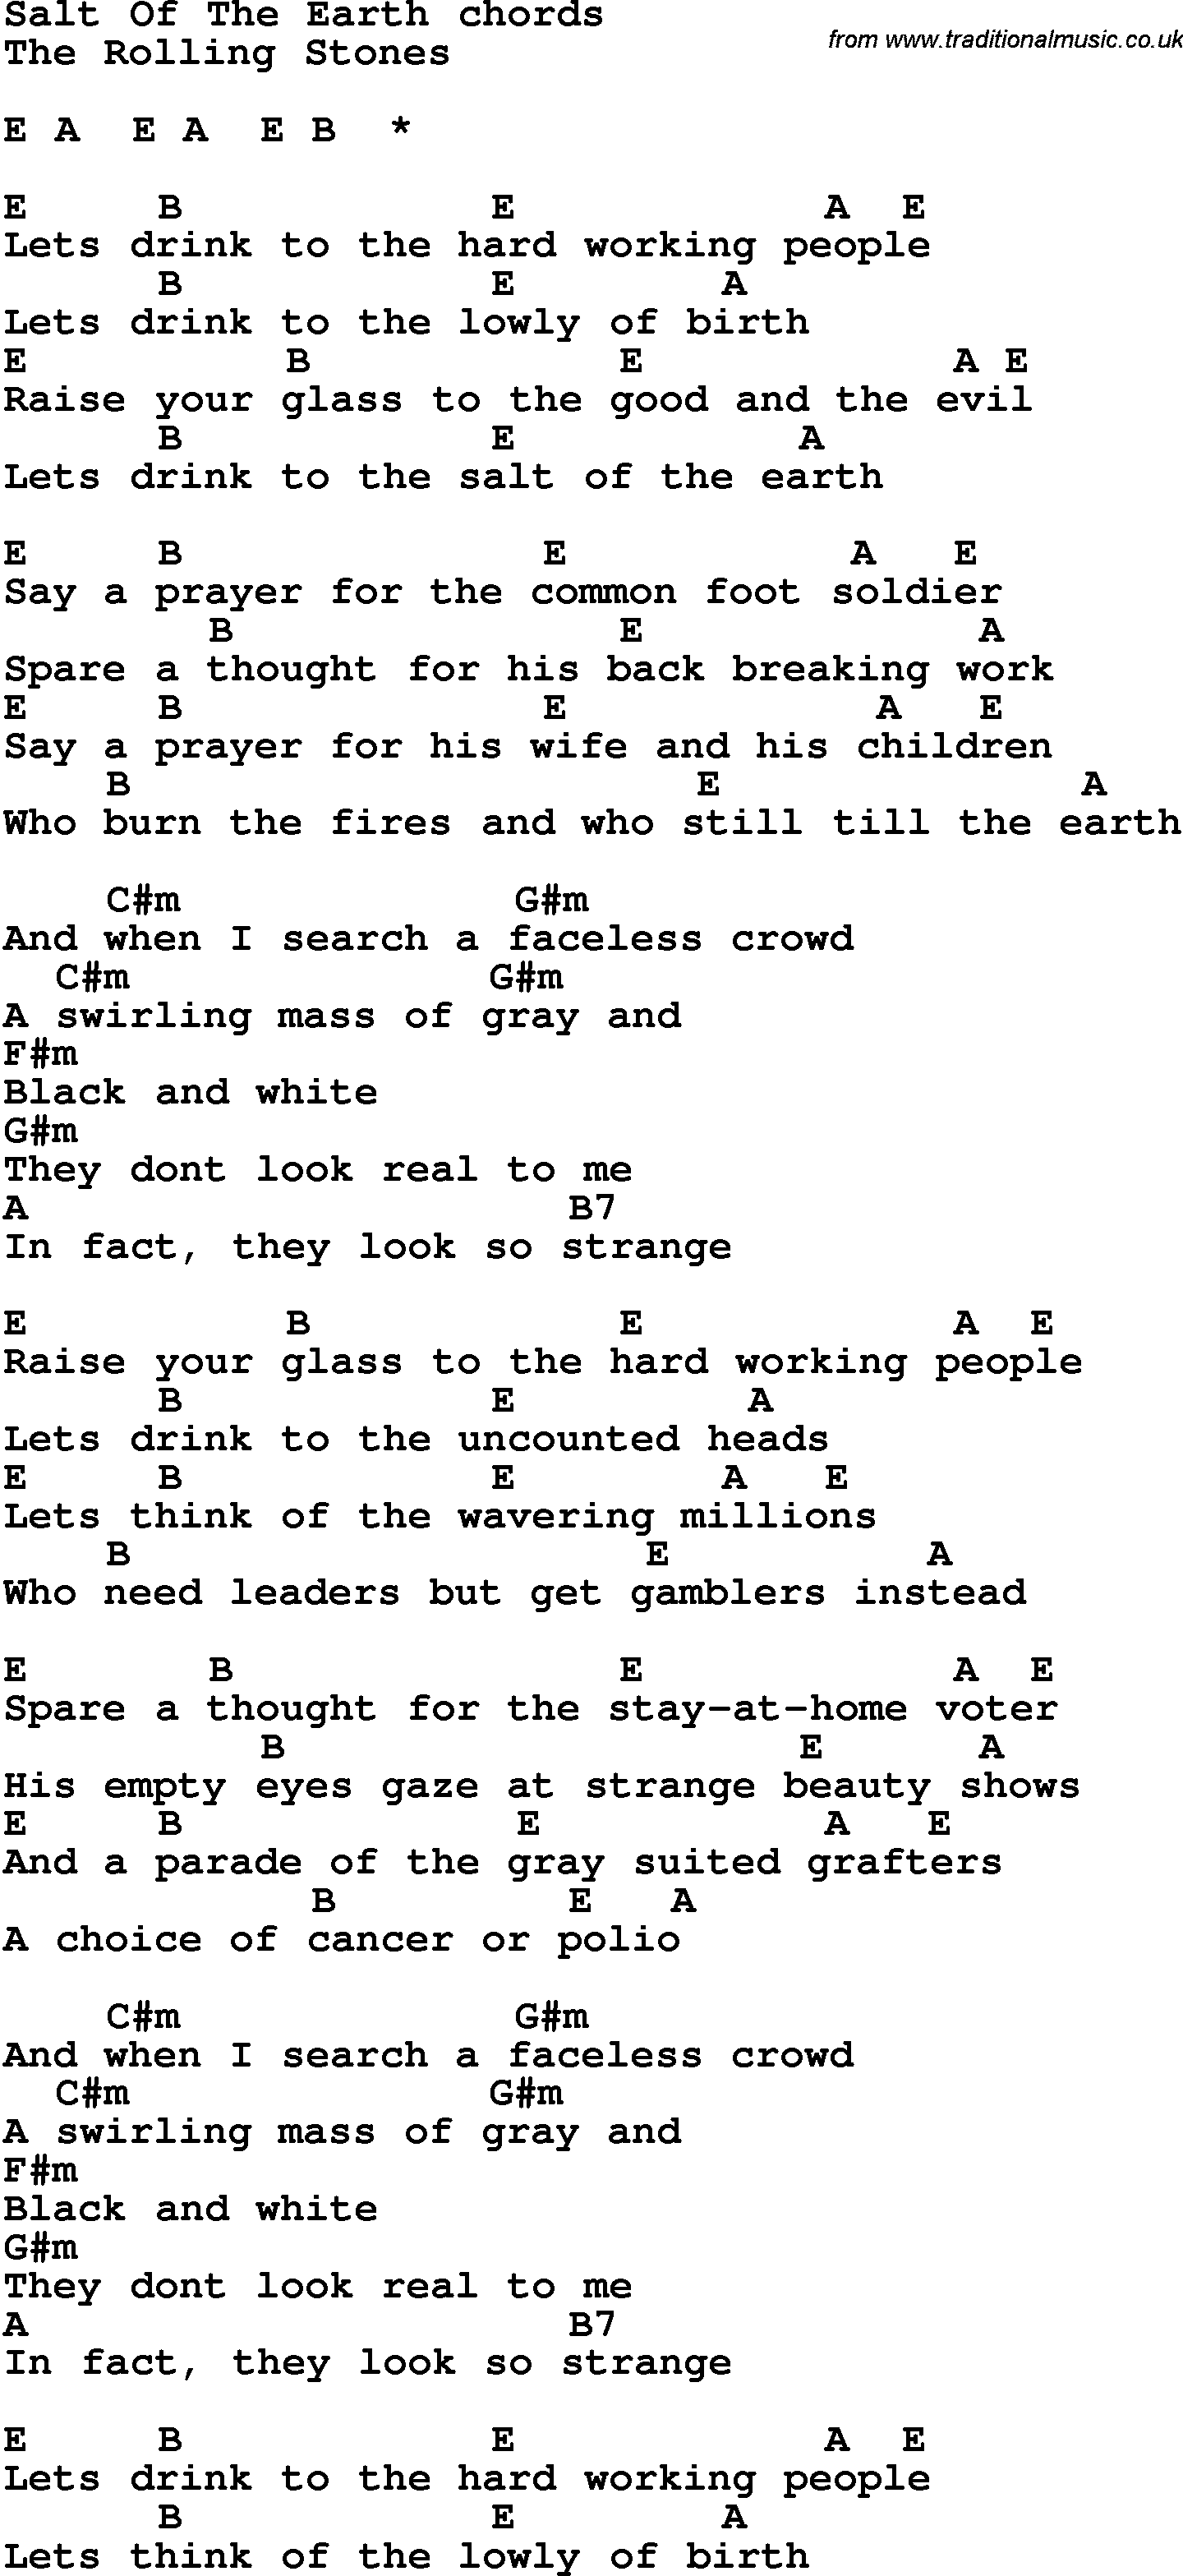 Song Lyrics with guitar chords for Salt Of The Earth